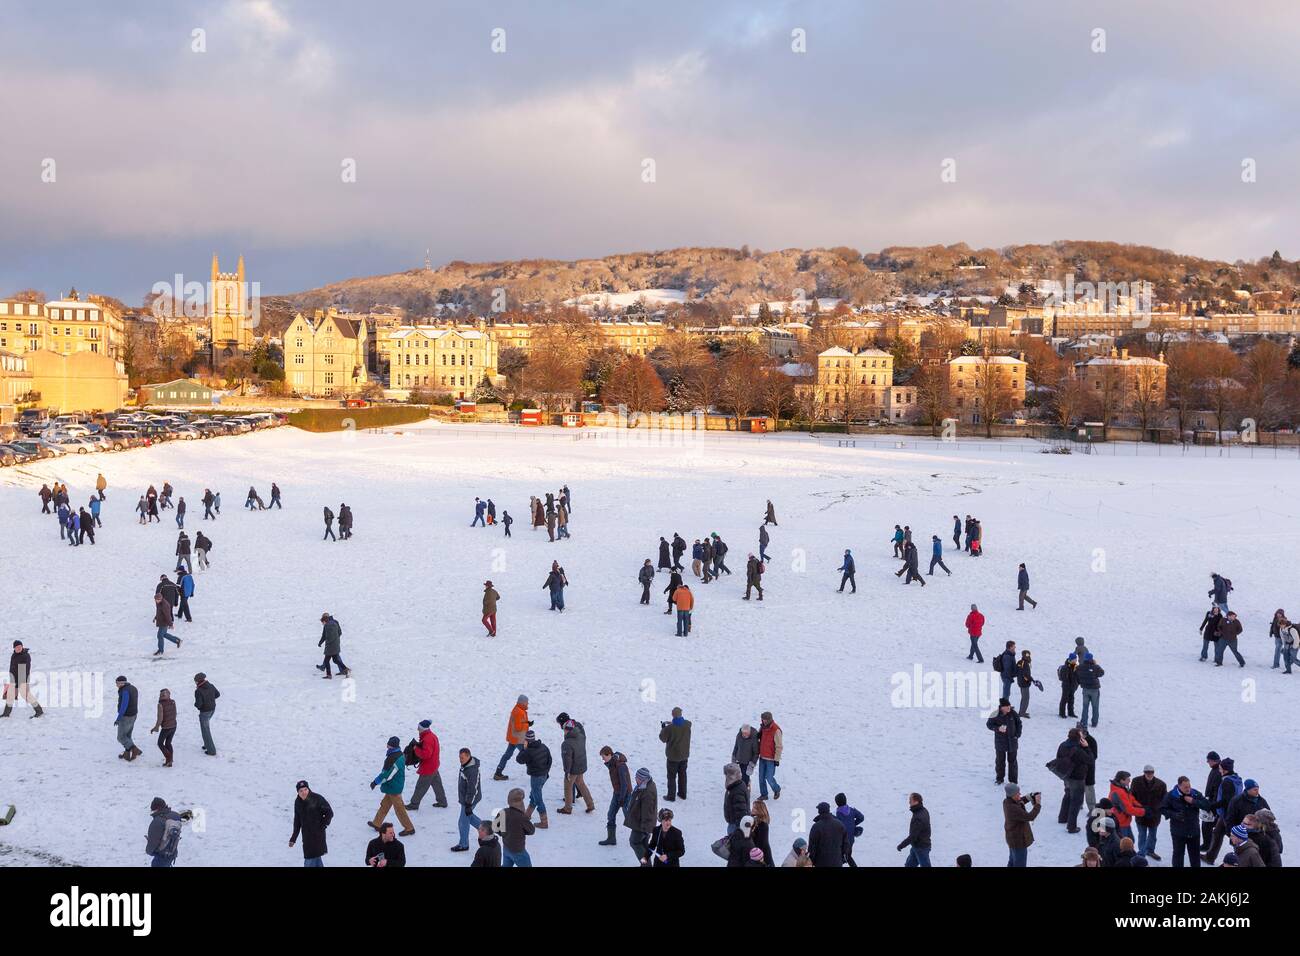 BATH, UNITED KINGDOM - DECEMBER 18, 2010 : Wide view of people on the snowy field at Bath Recreation Ground on a winter's day. Stock Photo